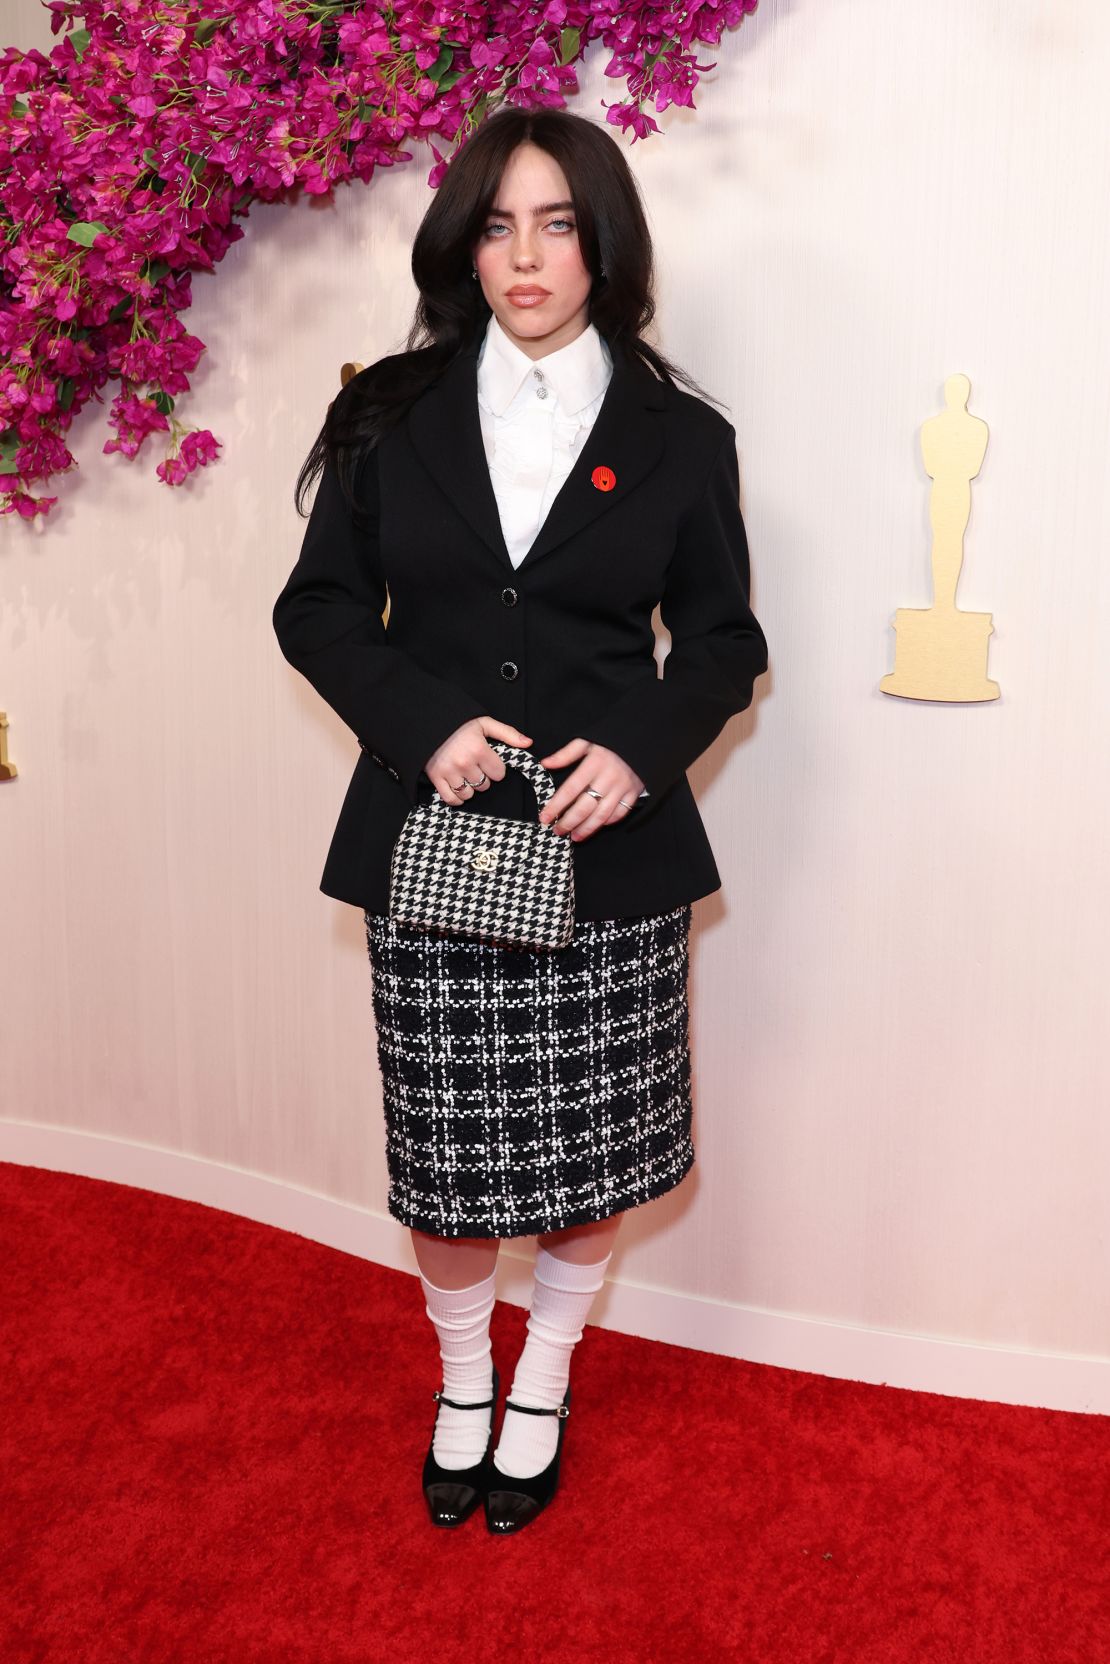 Billie Eilish, nominated for Best Original Song, arrived at the ceremony in Chanel.